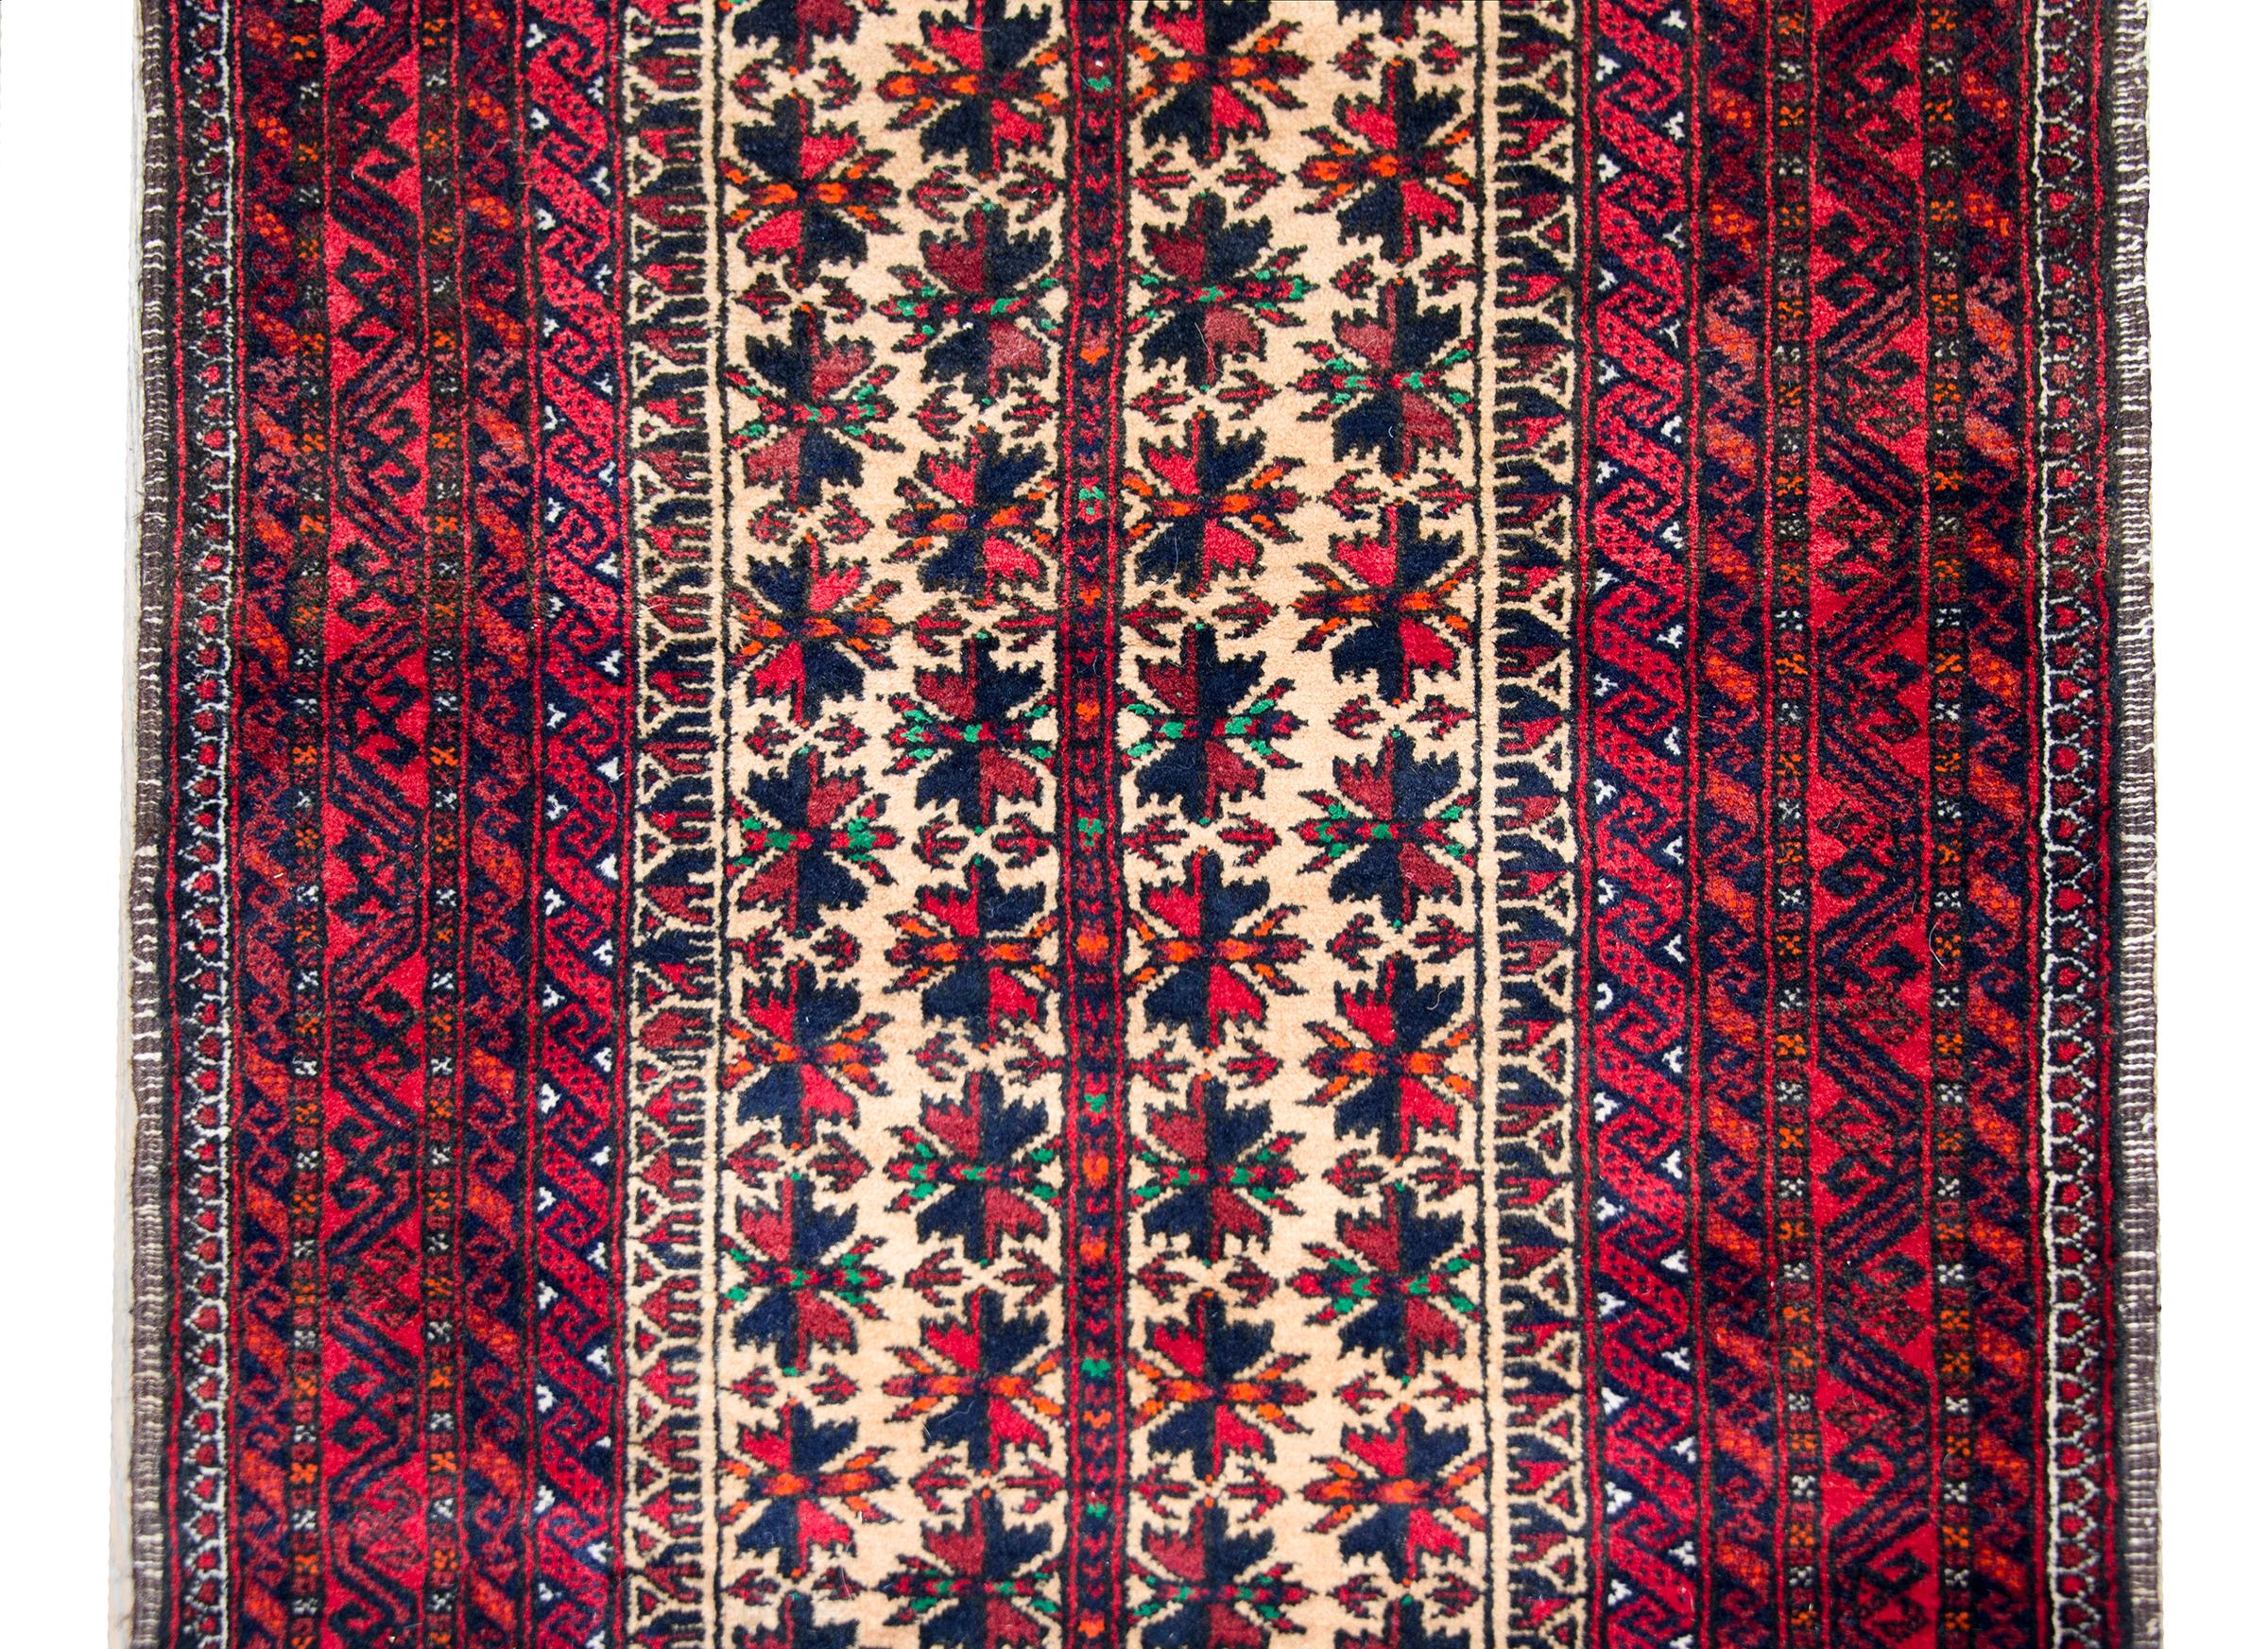 A beautiful mid-20th century Persian Baluch rug with a central stylized floral field surrounded by several petite geometric patterned stripes, and all woven in brilliant crimson, indigo, cream, green, and orange wool.